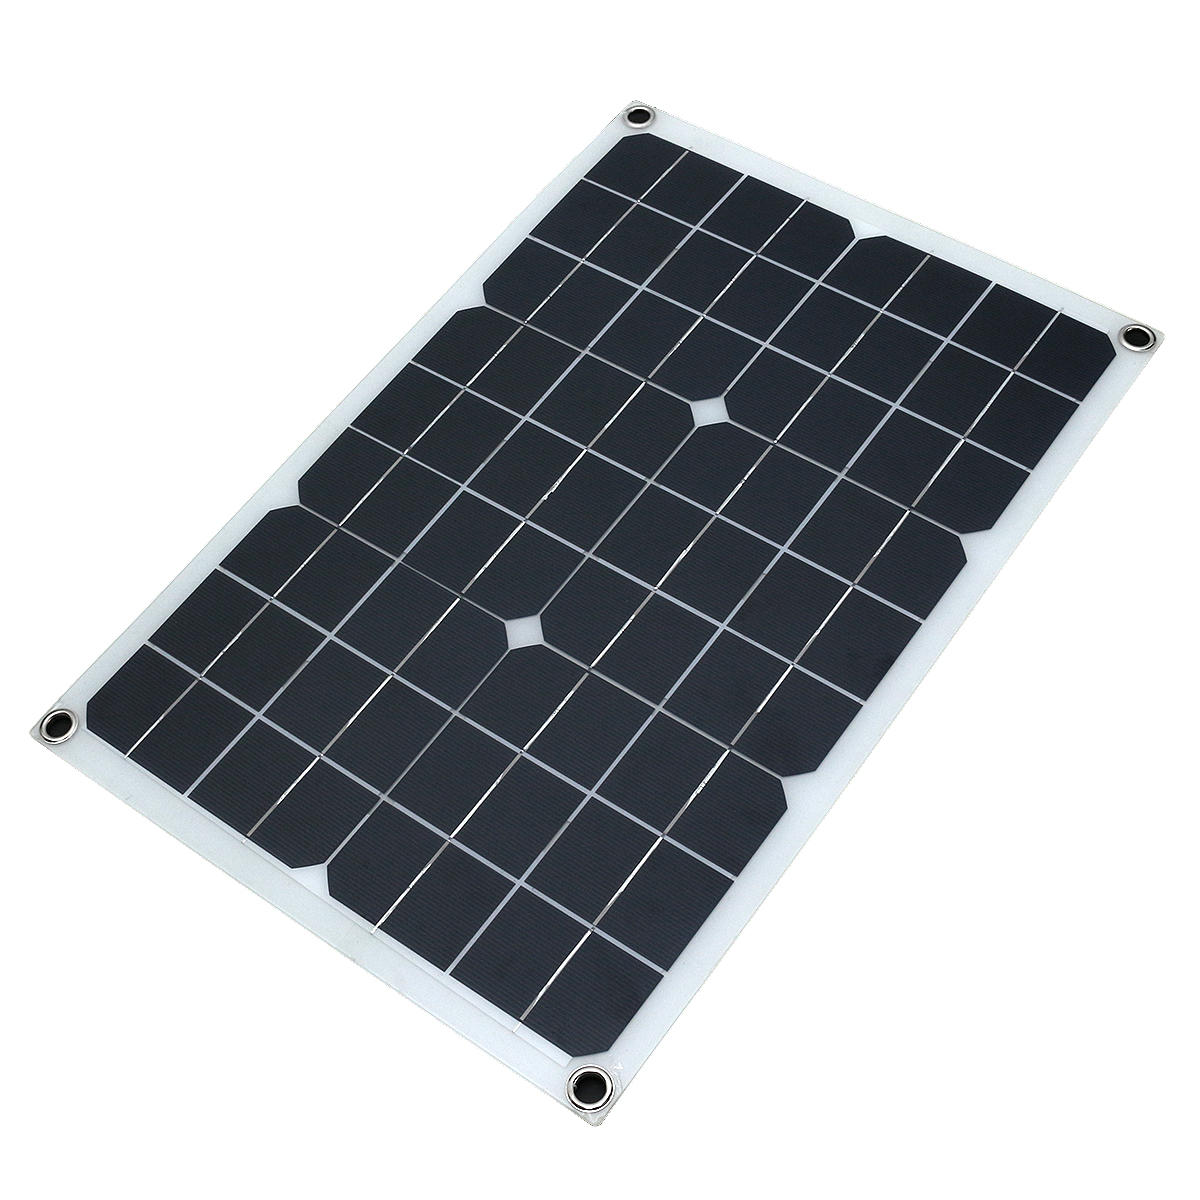 18V-100W-Solar-Panel-Portable-Solar-Power-Bank-for-Outdoors-Camping-Boat-Smartphones-Battery-Charger-1809958-3